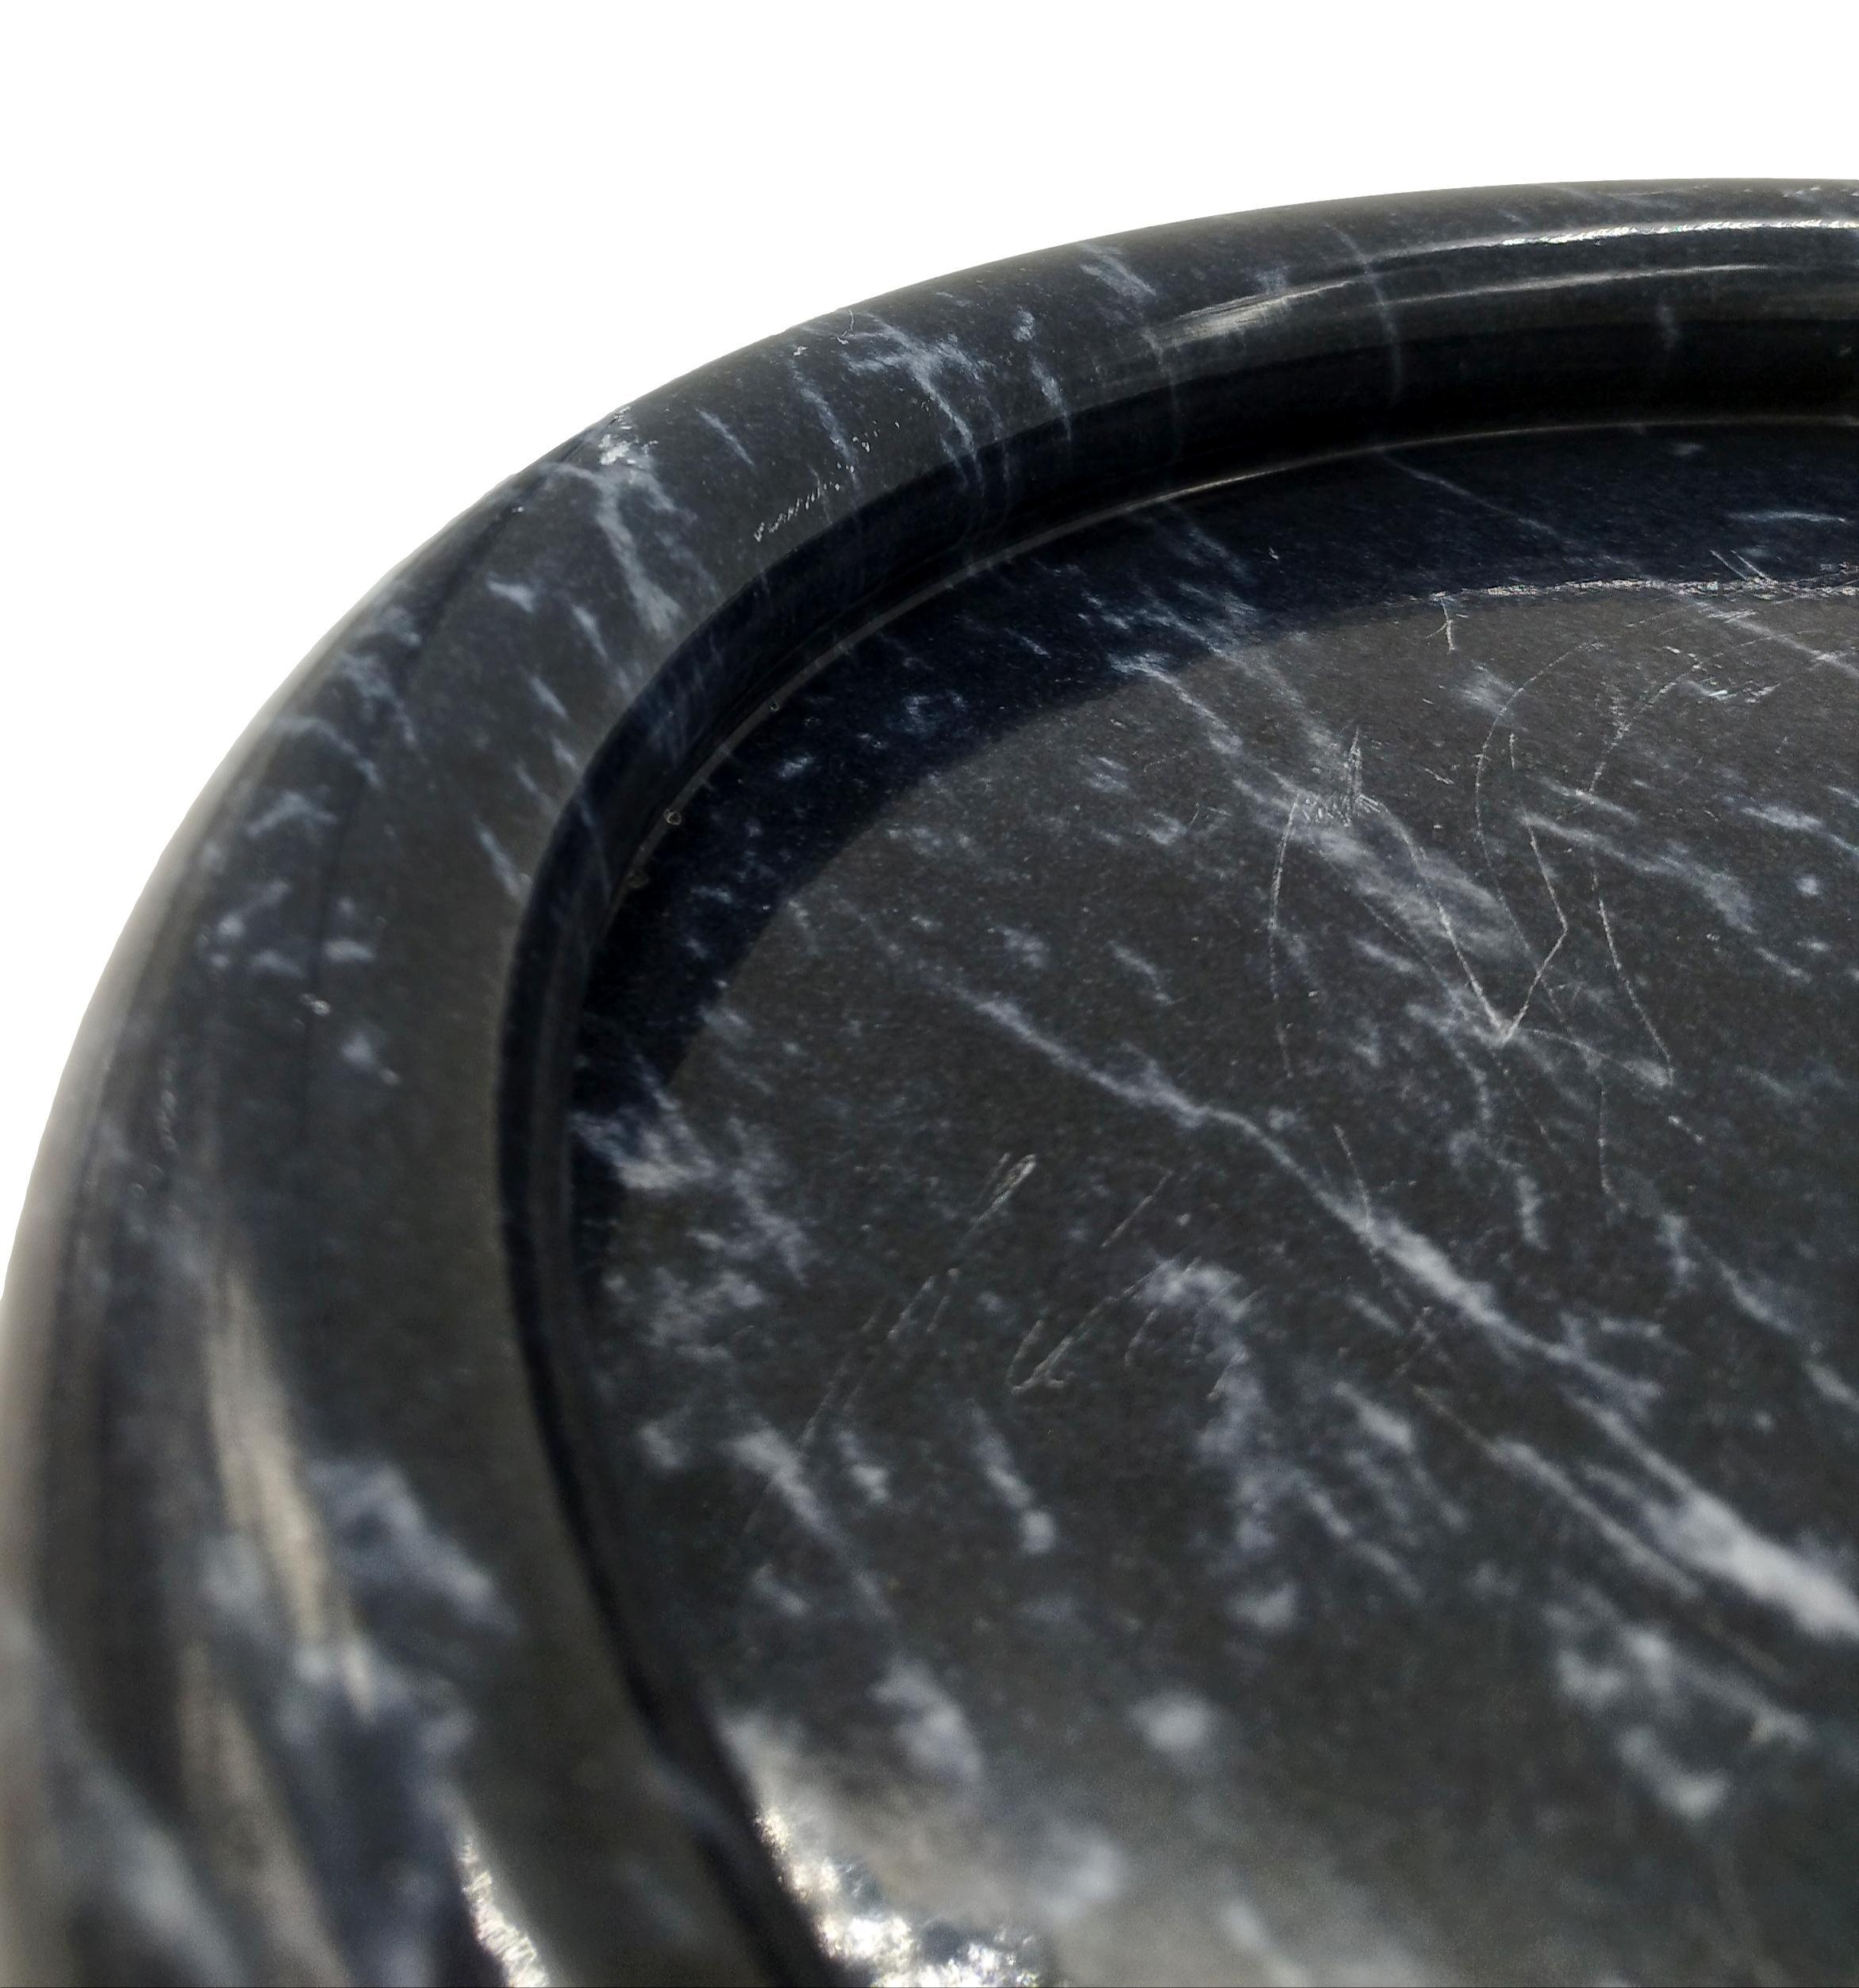 Mid-Century Modern Sergio Asti for Up & Up Black Marble Bowl or Ashtray, Italy, 1970s